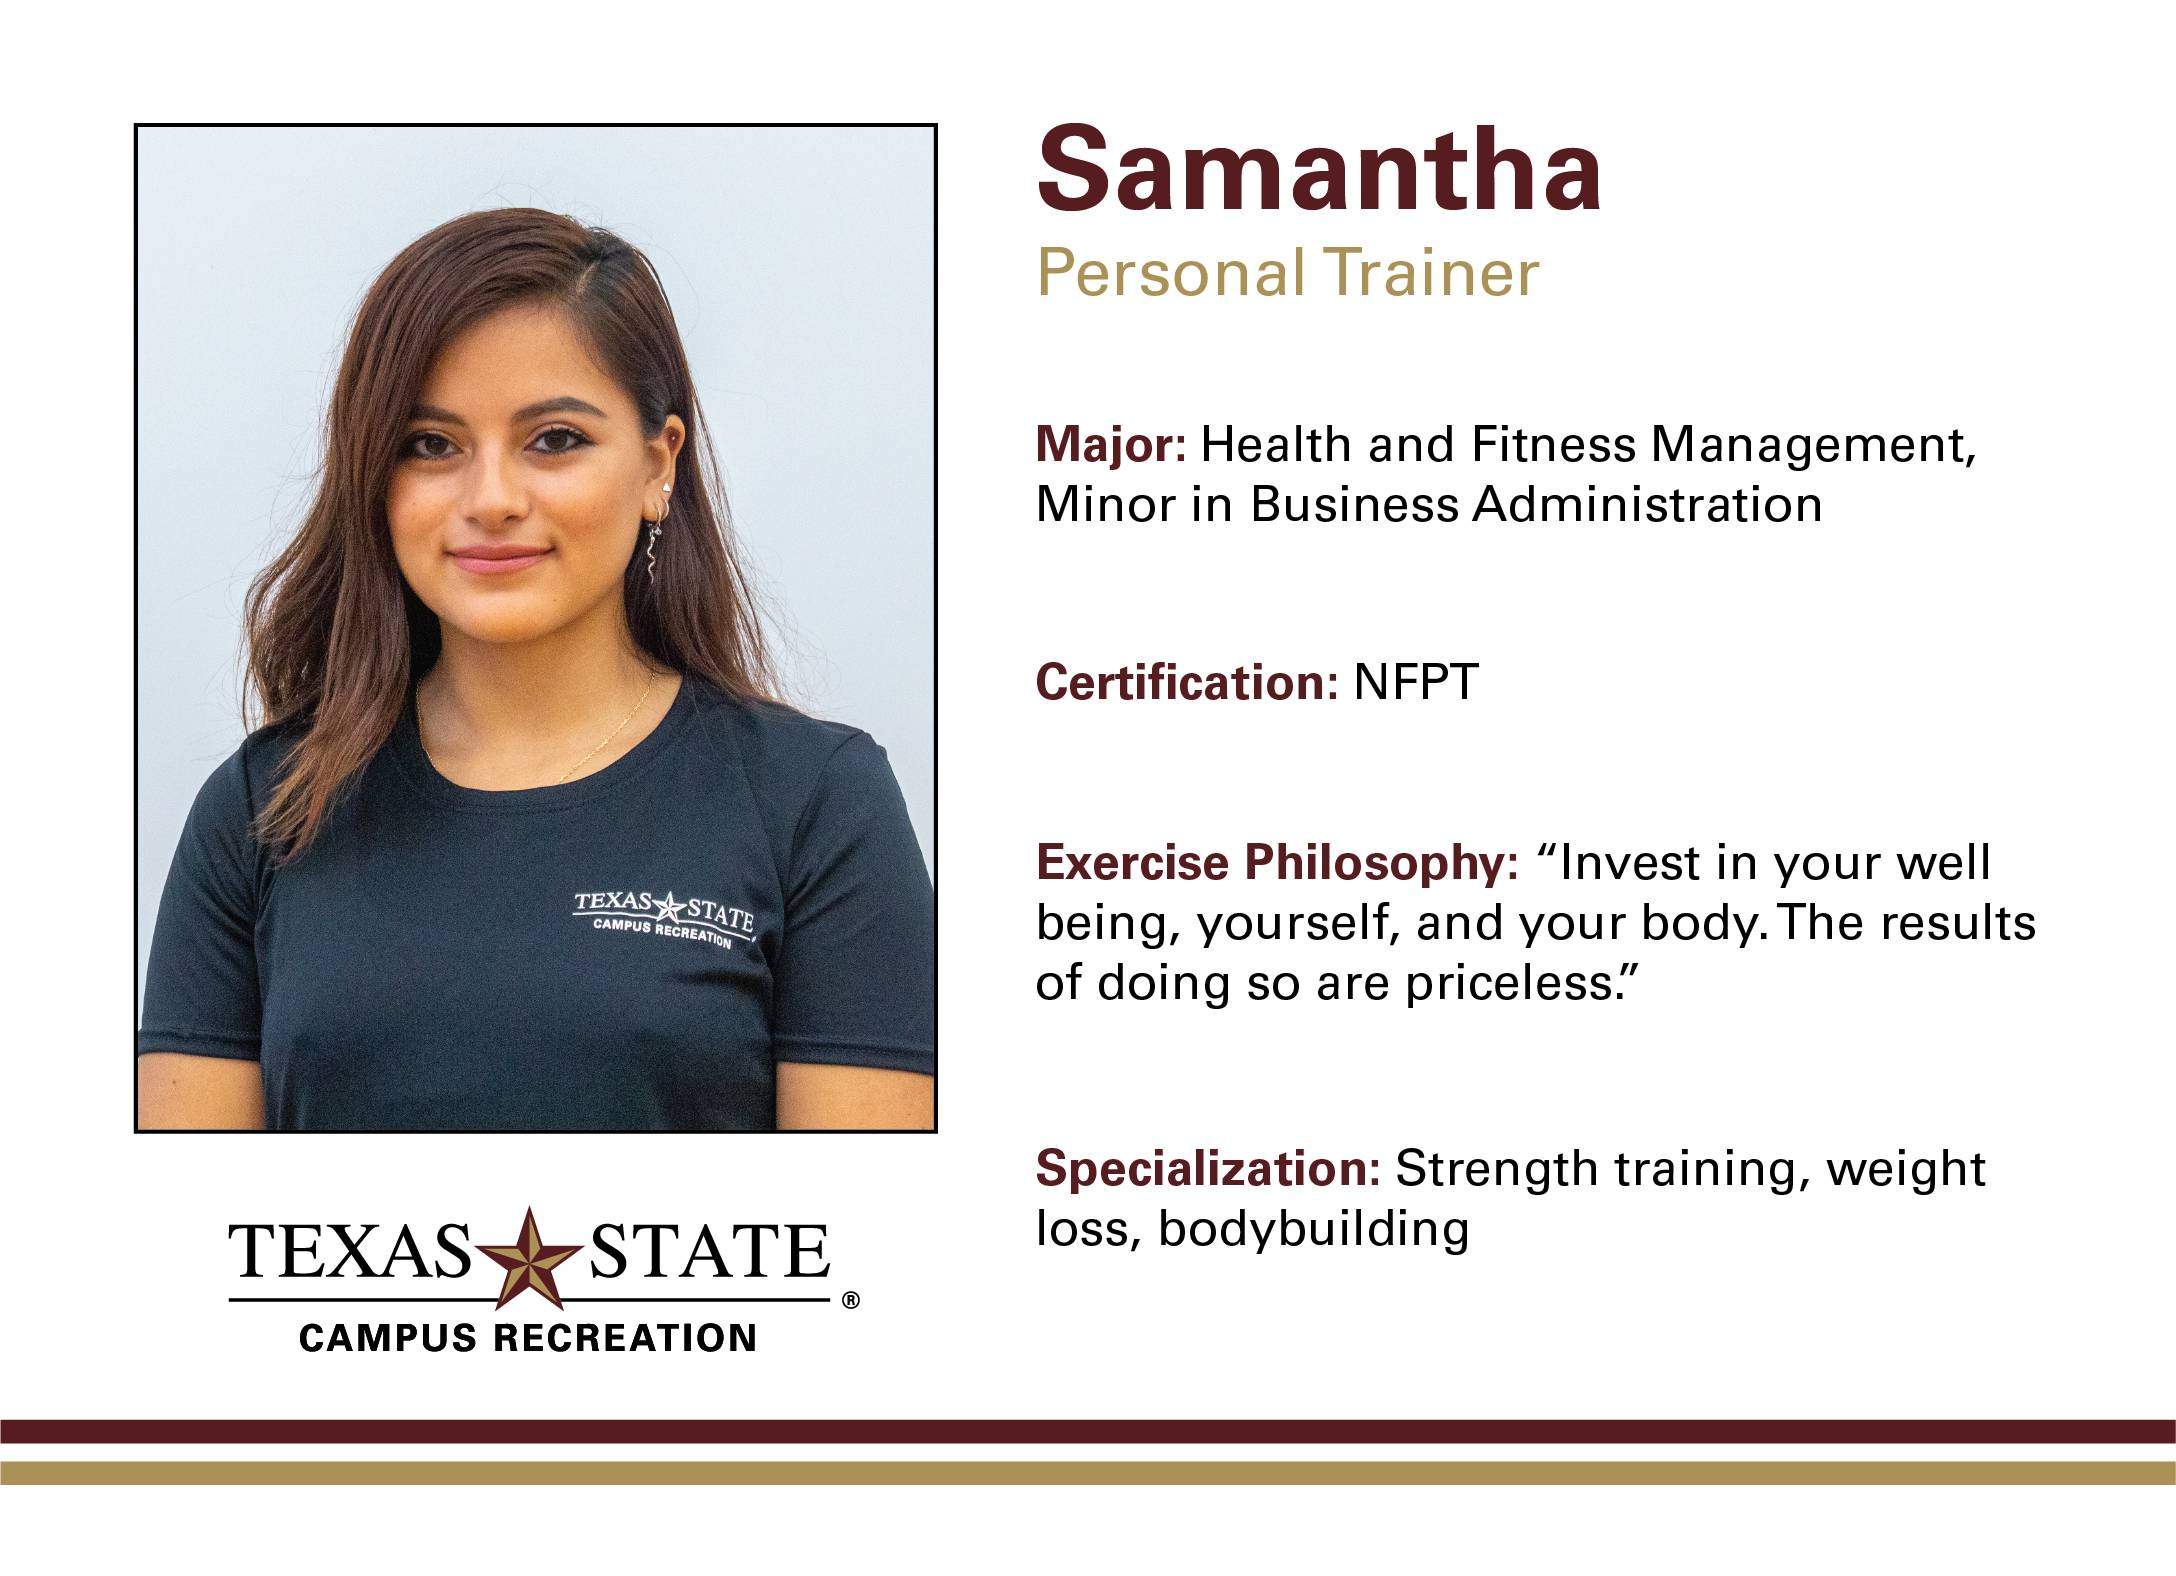 A bio of Samantha one of the SRC trainers